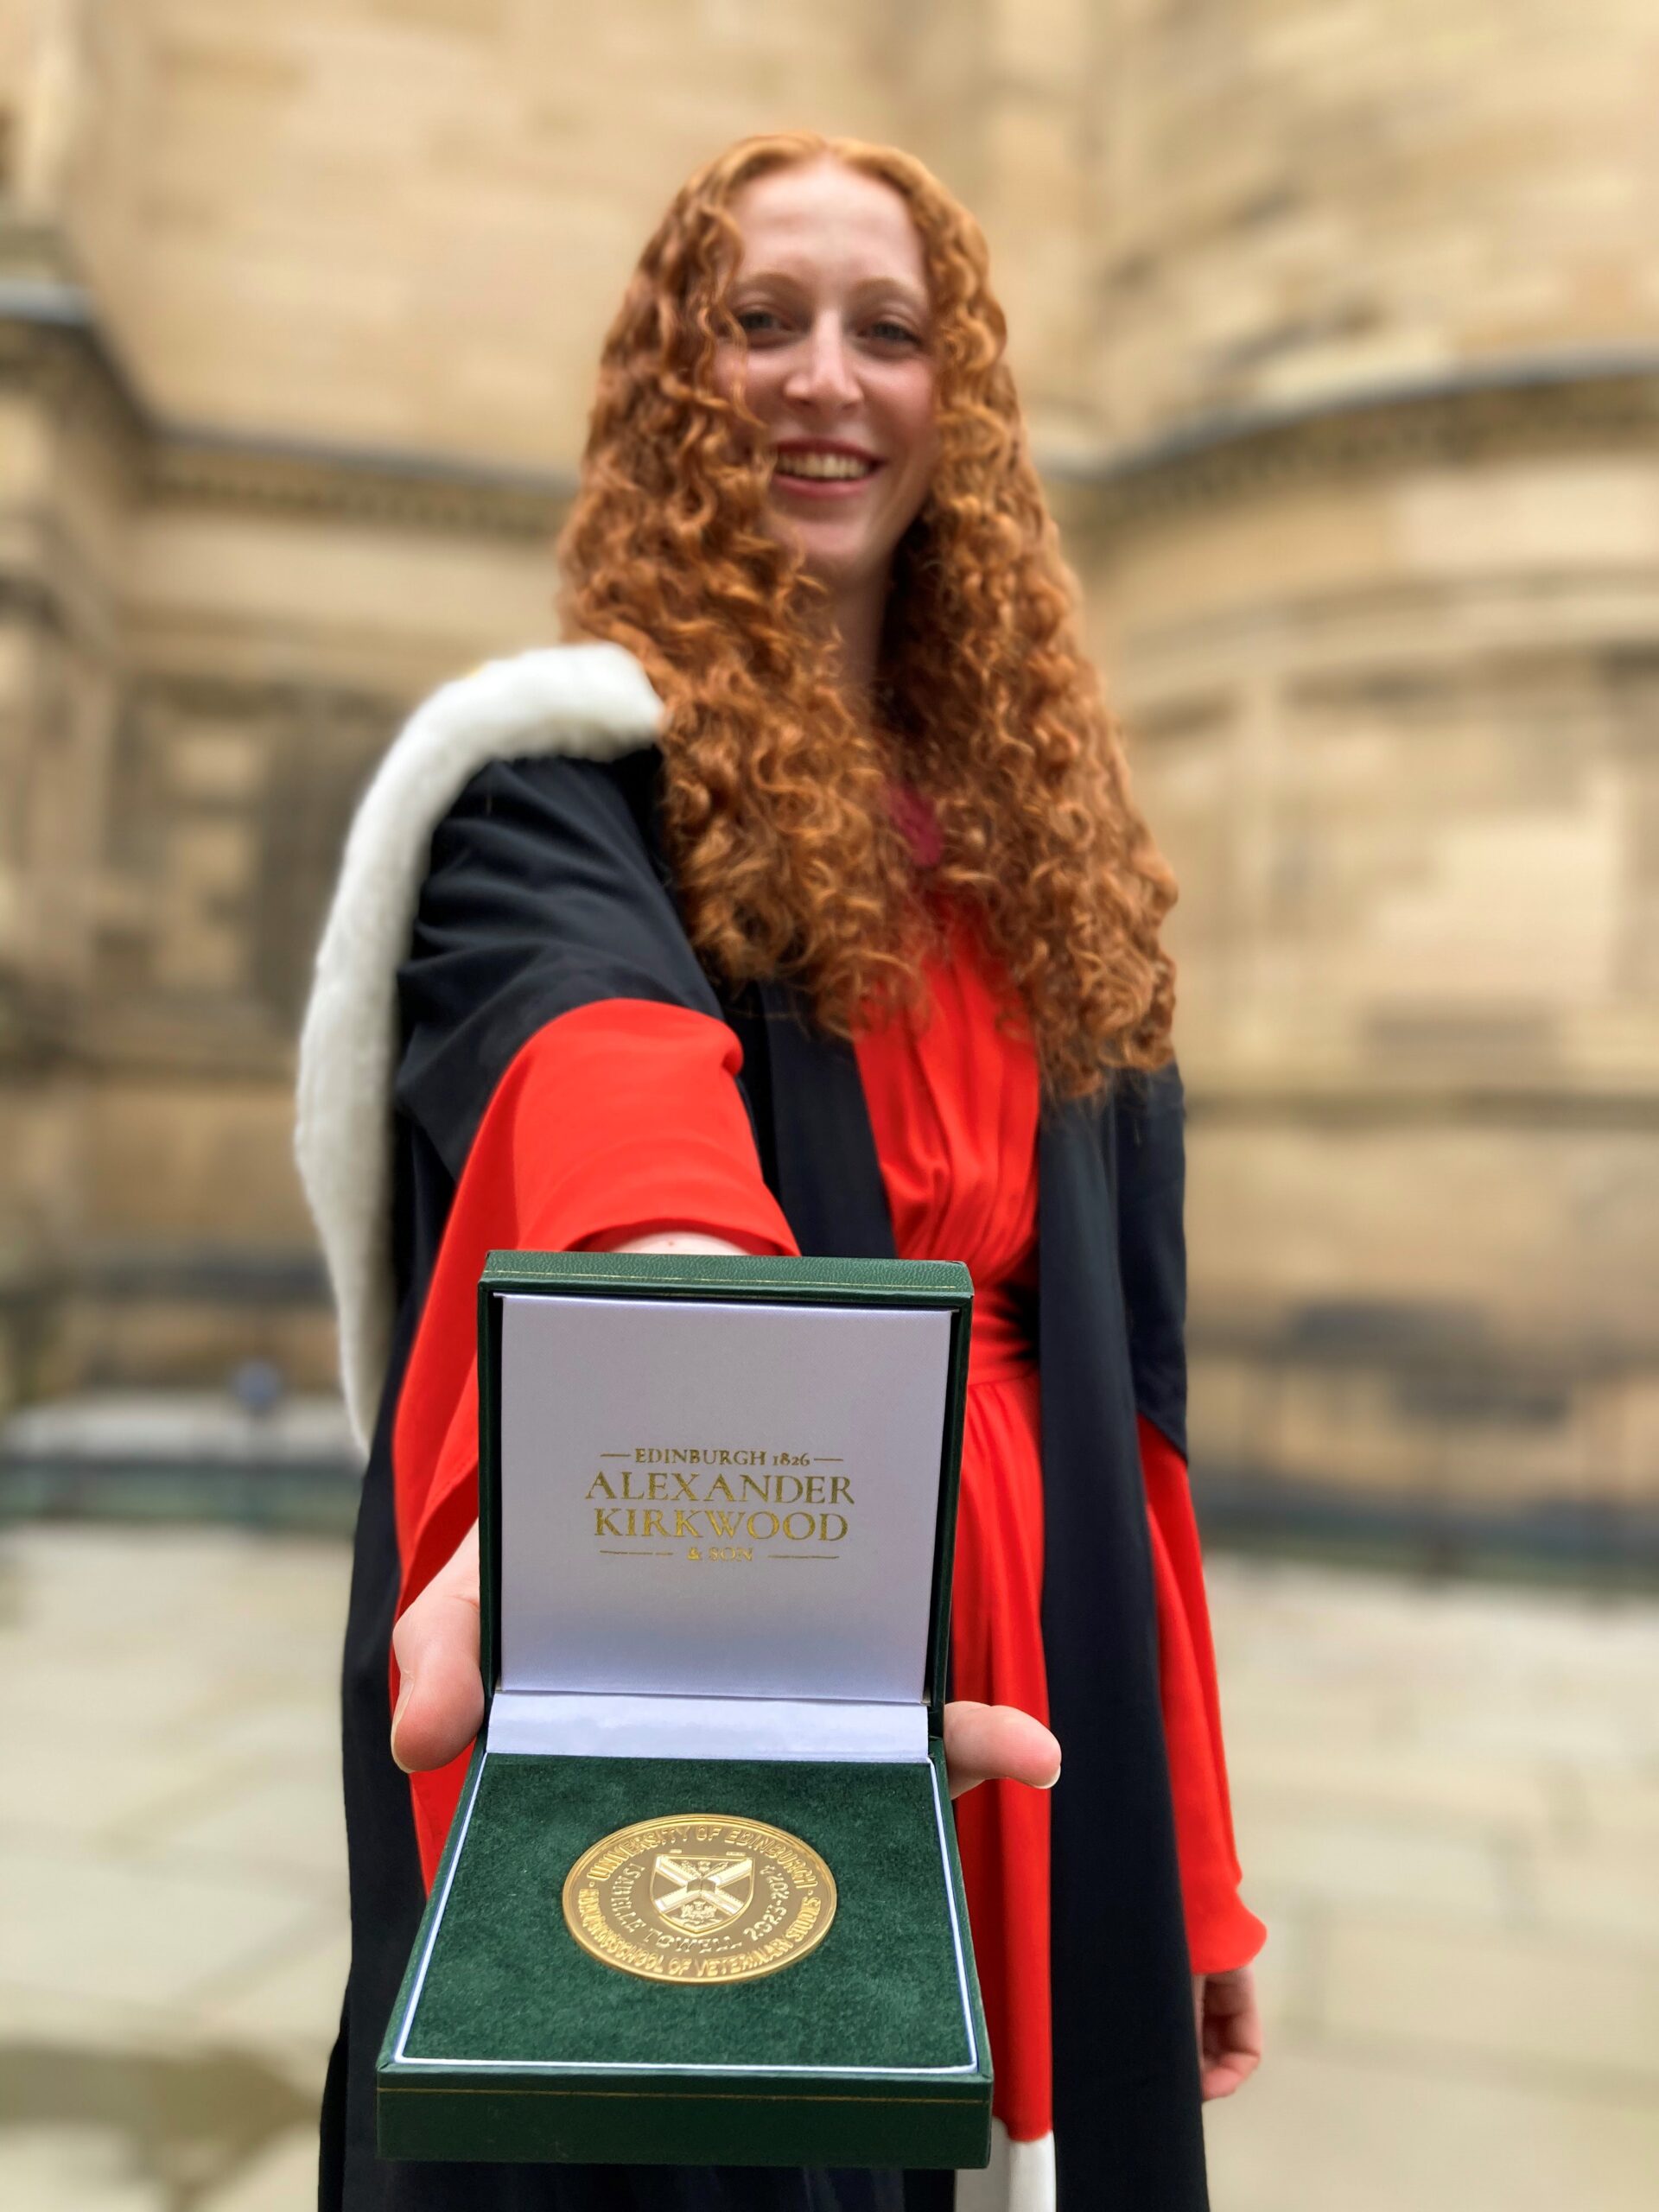 A graduate in her robes displays a medal for the camera.